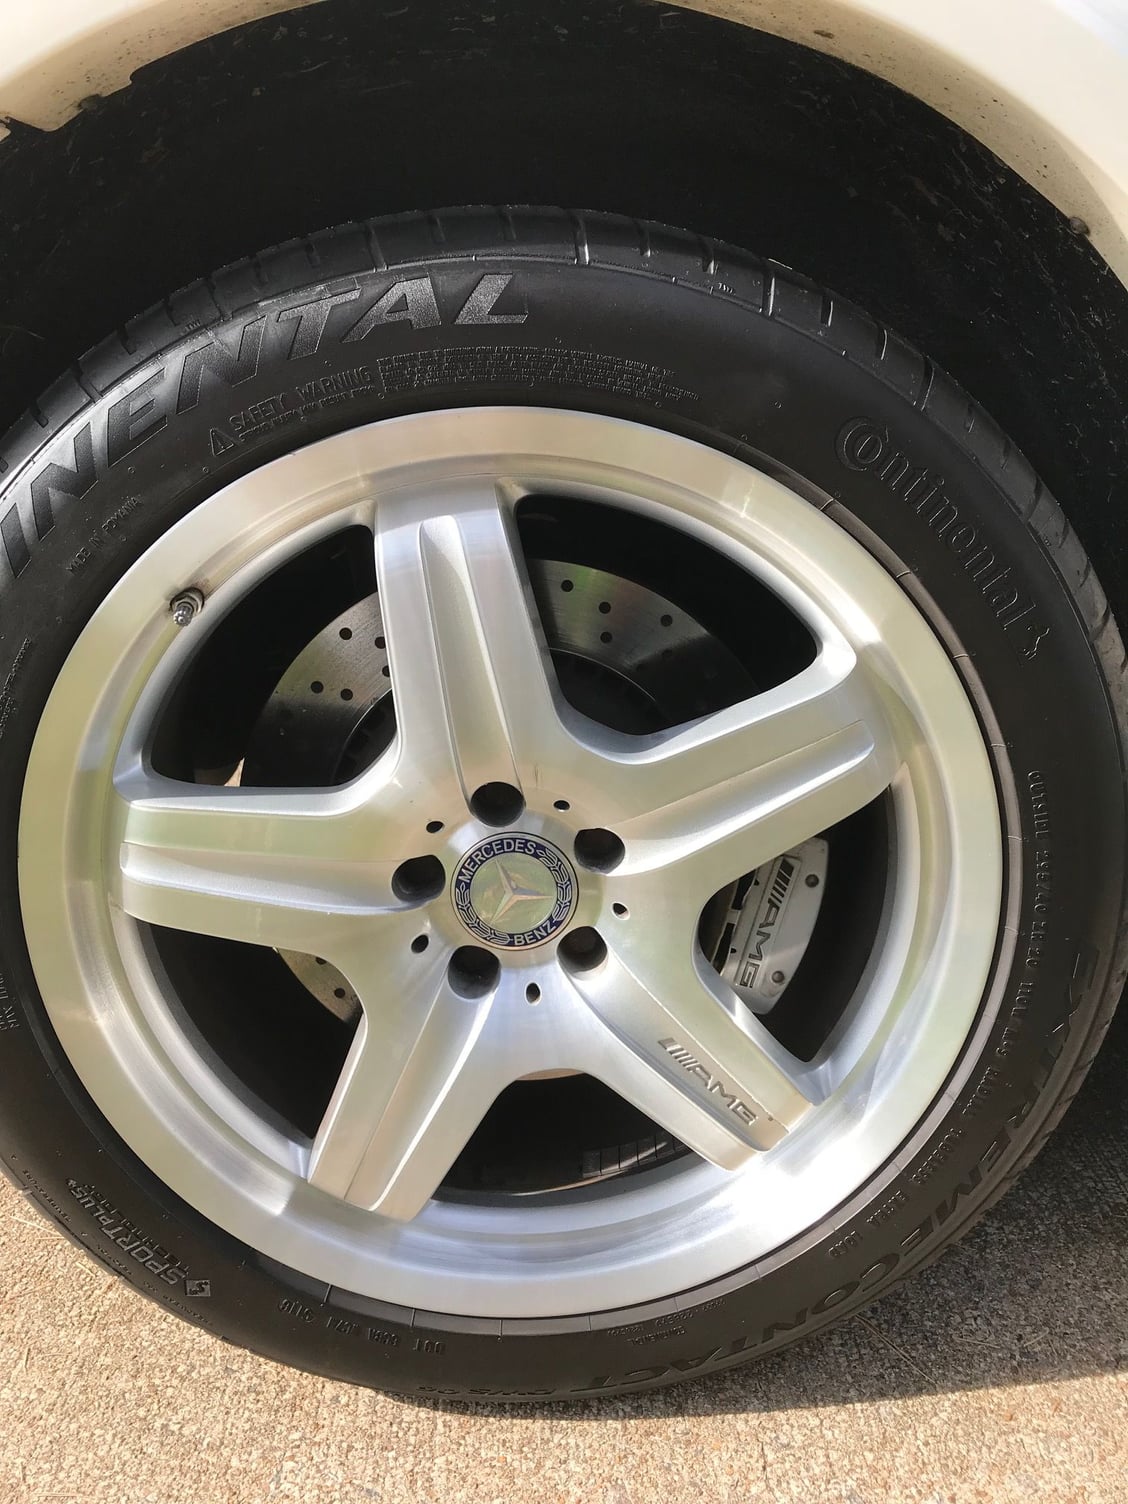 Wheels and Tires/Axles - FS: NC W164 ML63 oem wheels 20x10 in excellent condition - Used - 2007 to 2012 Mercedes-Benz ML63 AMG - Raleigh, NC 27616, United States